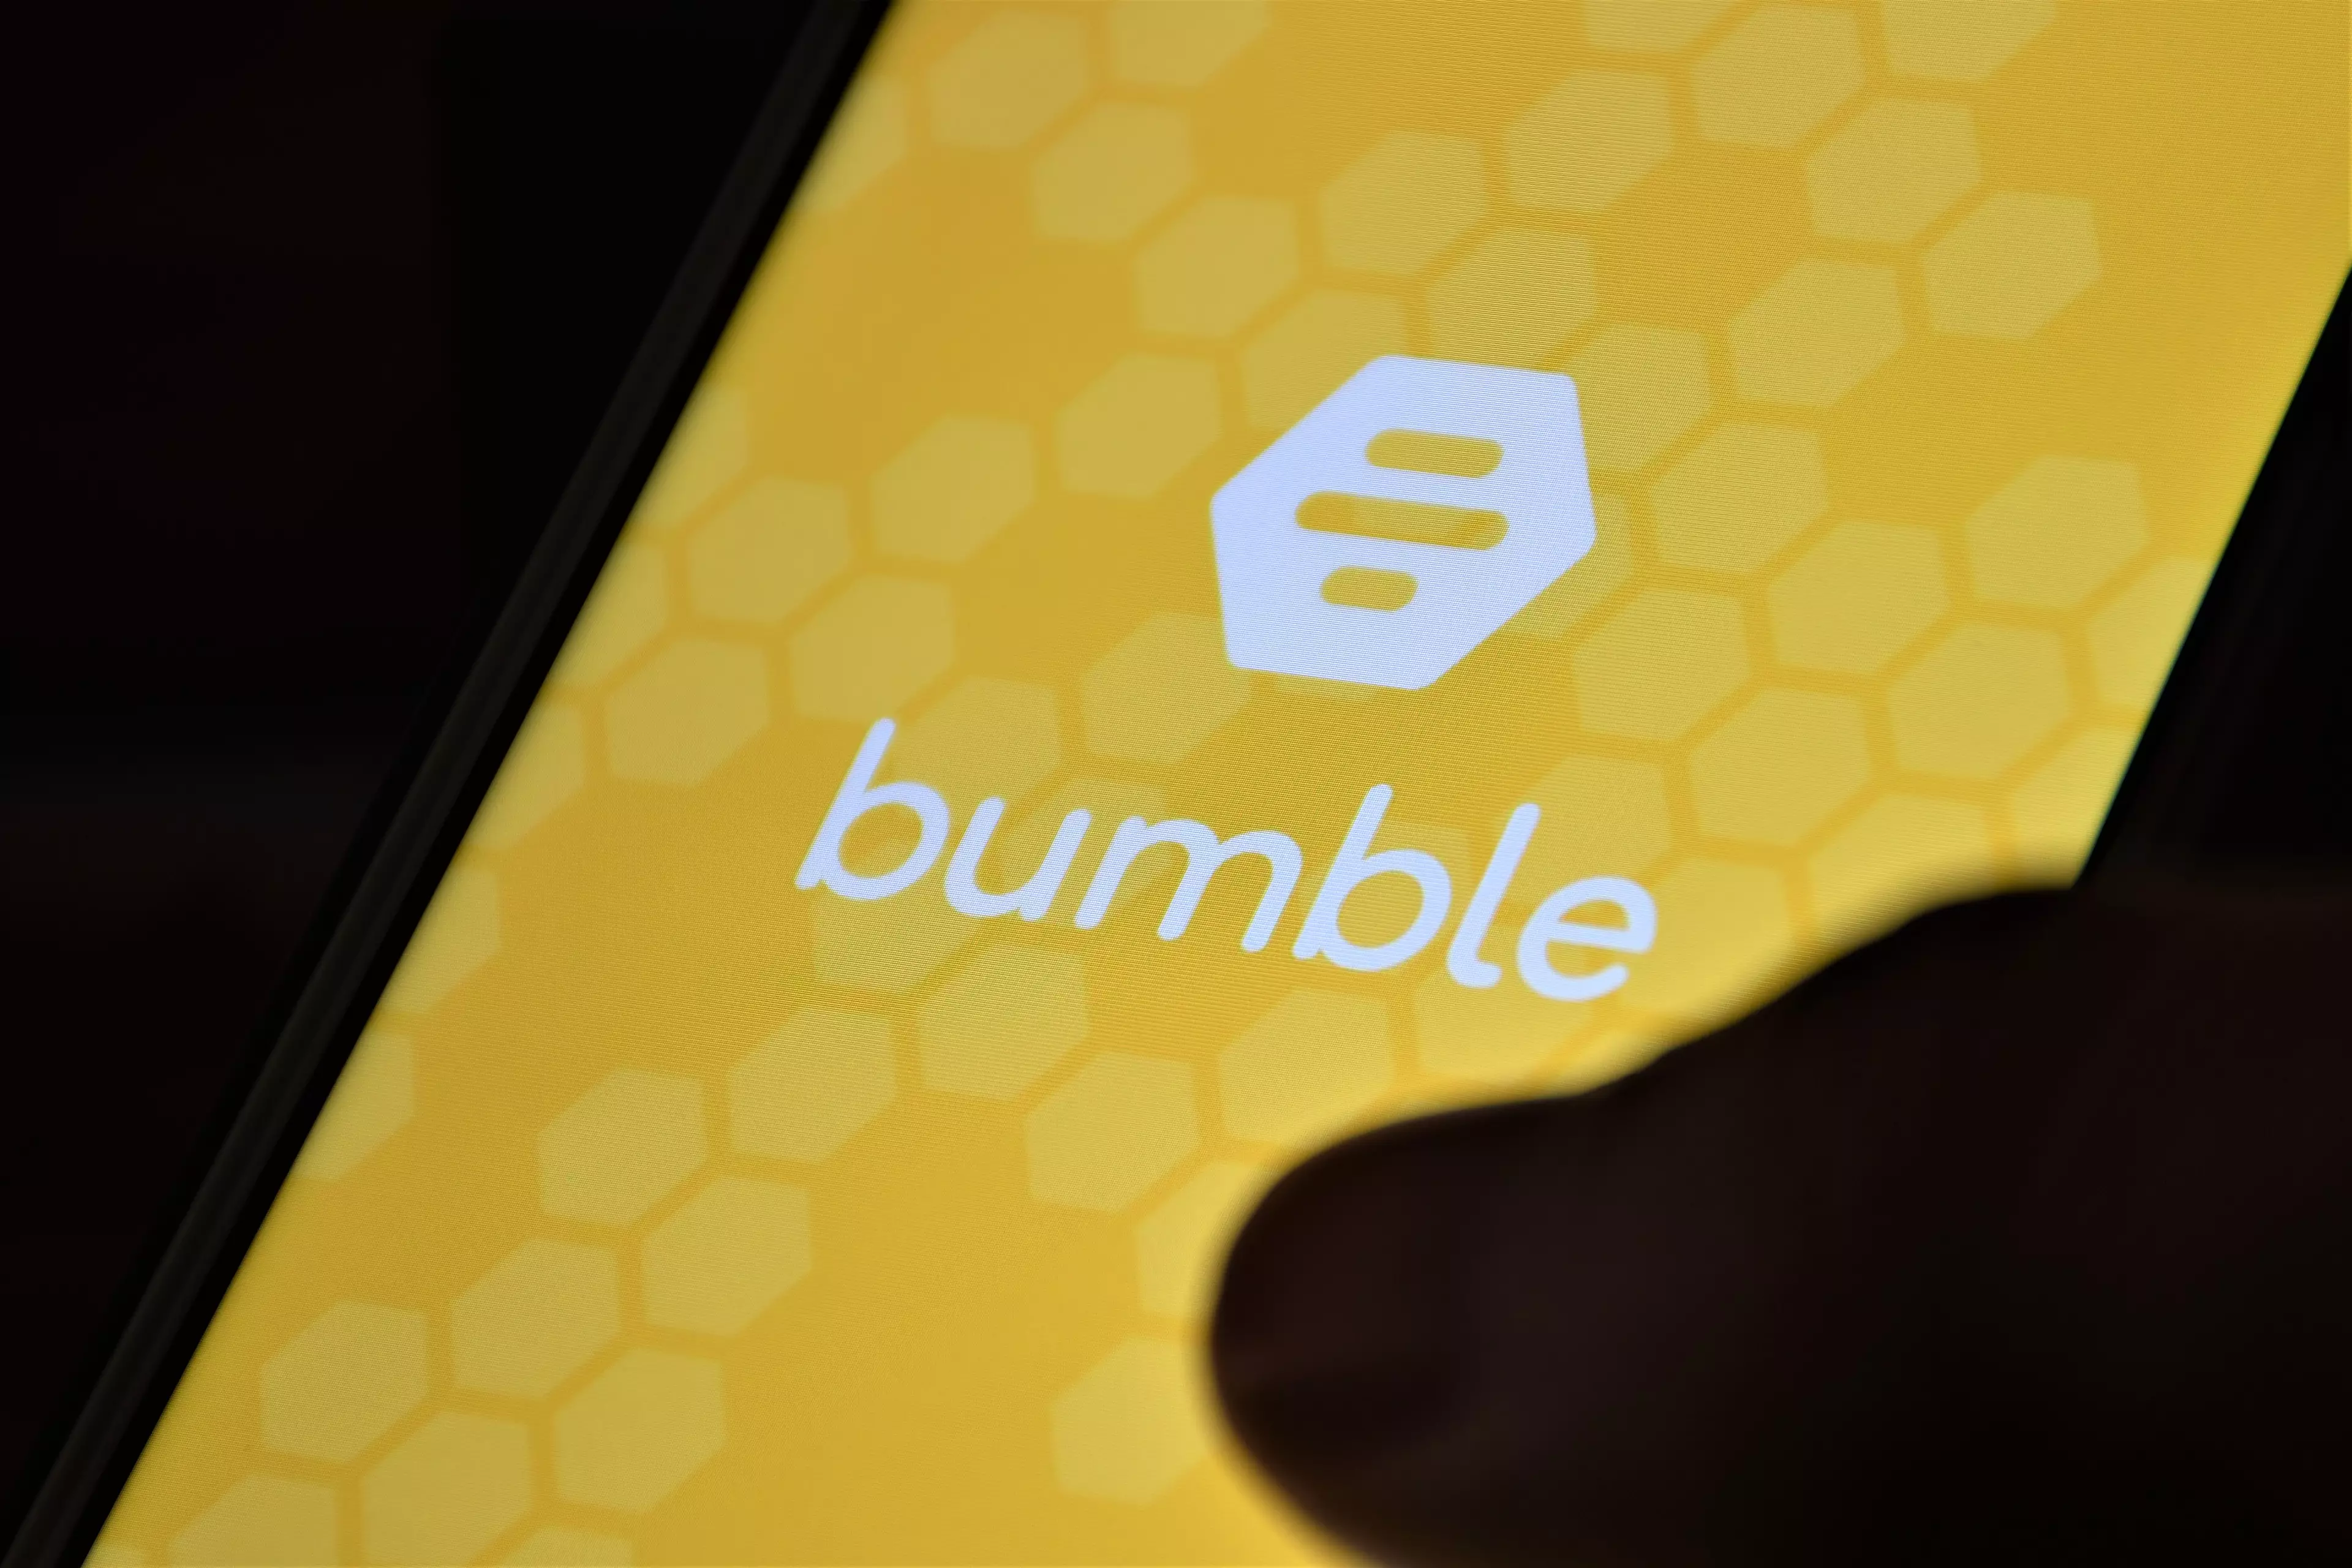 Bumble has seen an increase in vaccine mentions (